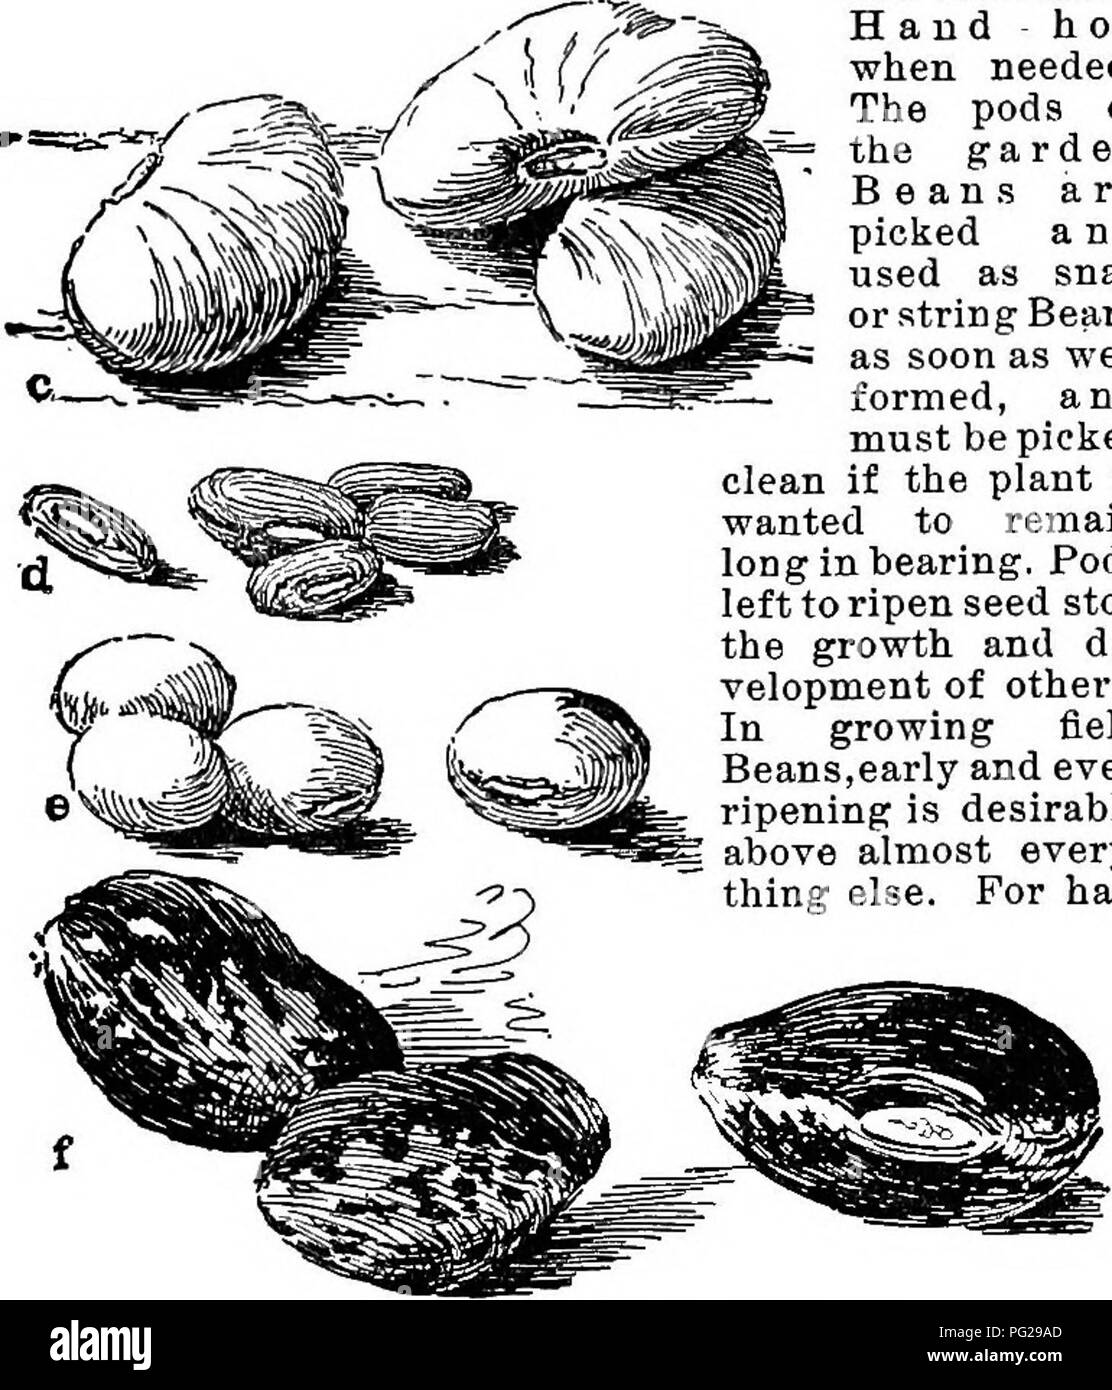 . Cyclopedia of American horticulture, comprising suggestions for cultivation of horticultural plants, descriptions of the species of fruits, vegetables, flowers, and ornamental plants sold in the United States and Canada, together with geographical and biographical sketches. Gardening. 191. Types of Beans. Natural size. a Vieia Faba. b, Phaseolus vulgaris, c, Phaseolus lunatus. d, Dolichos sesquipedalis. e, Glycine hispida. f, Phaseolus multillorus. vesting the crop, special tools have been devised and are in use by those who make a business of Bean-grow- ing ; but when a regular Bean-puller  Stock Photo